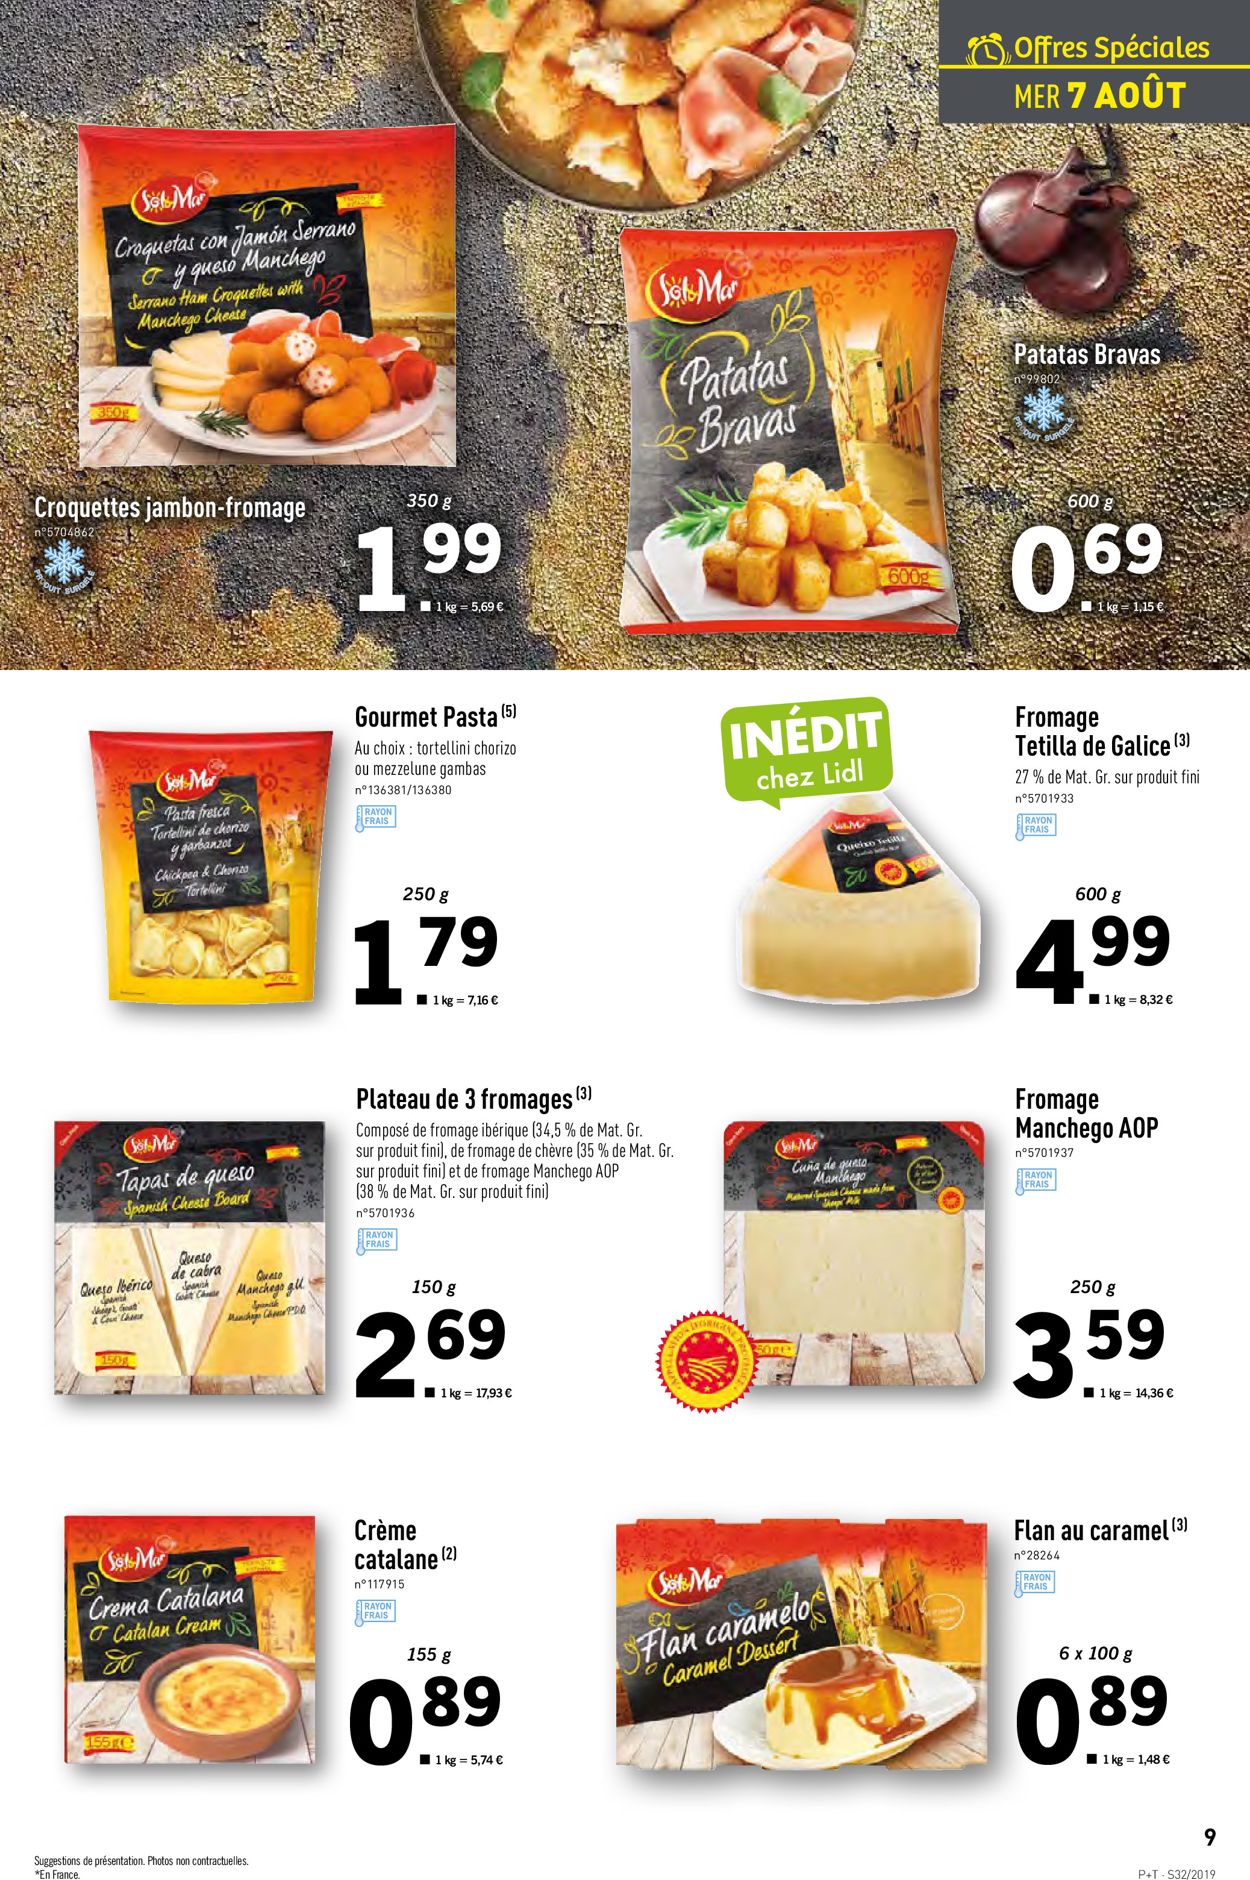 Lidl Catalogue - 07.08-13.08.2019 (Page 9)